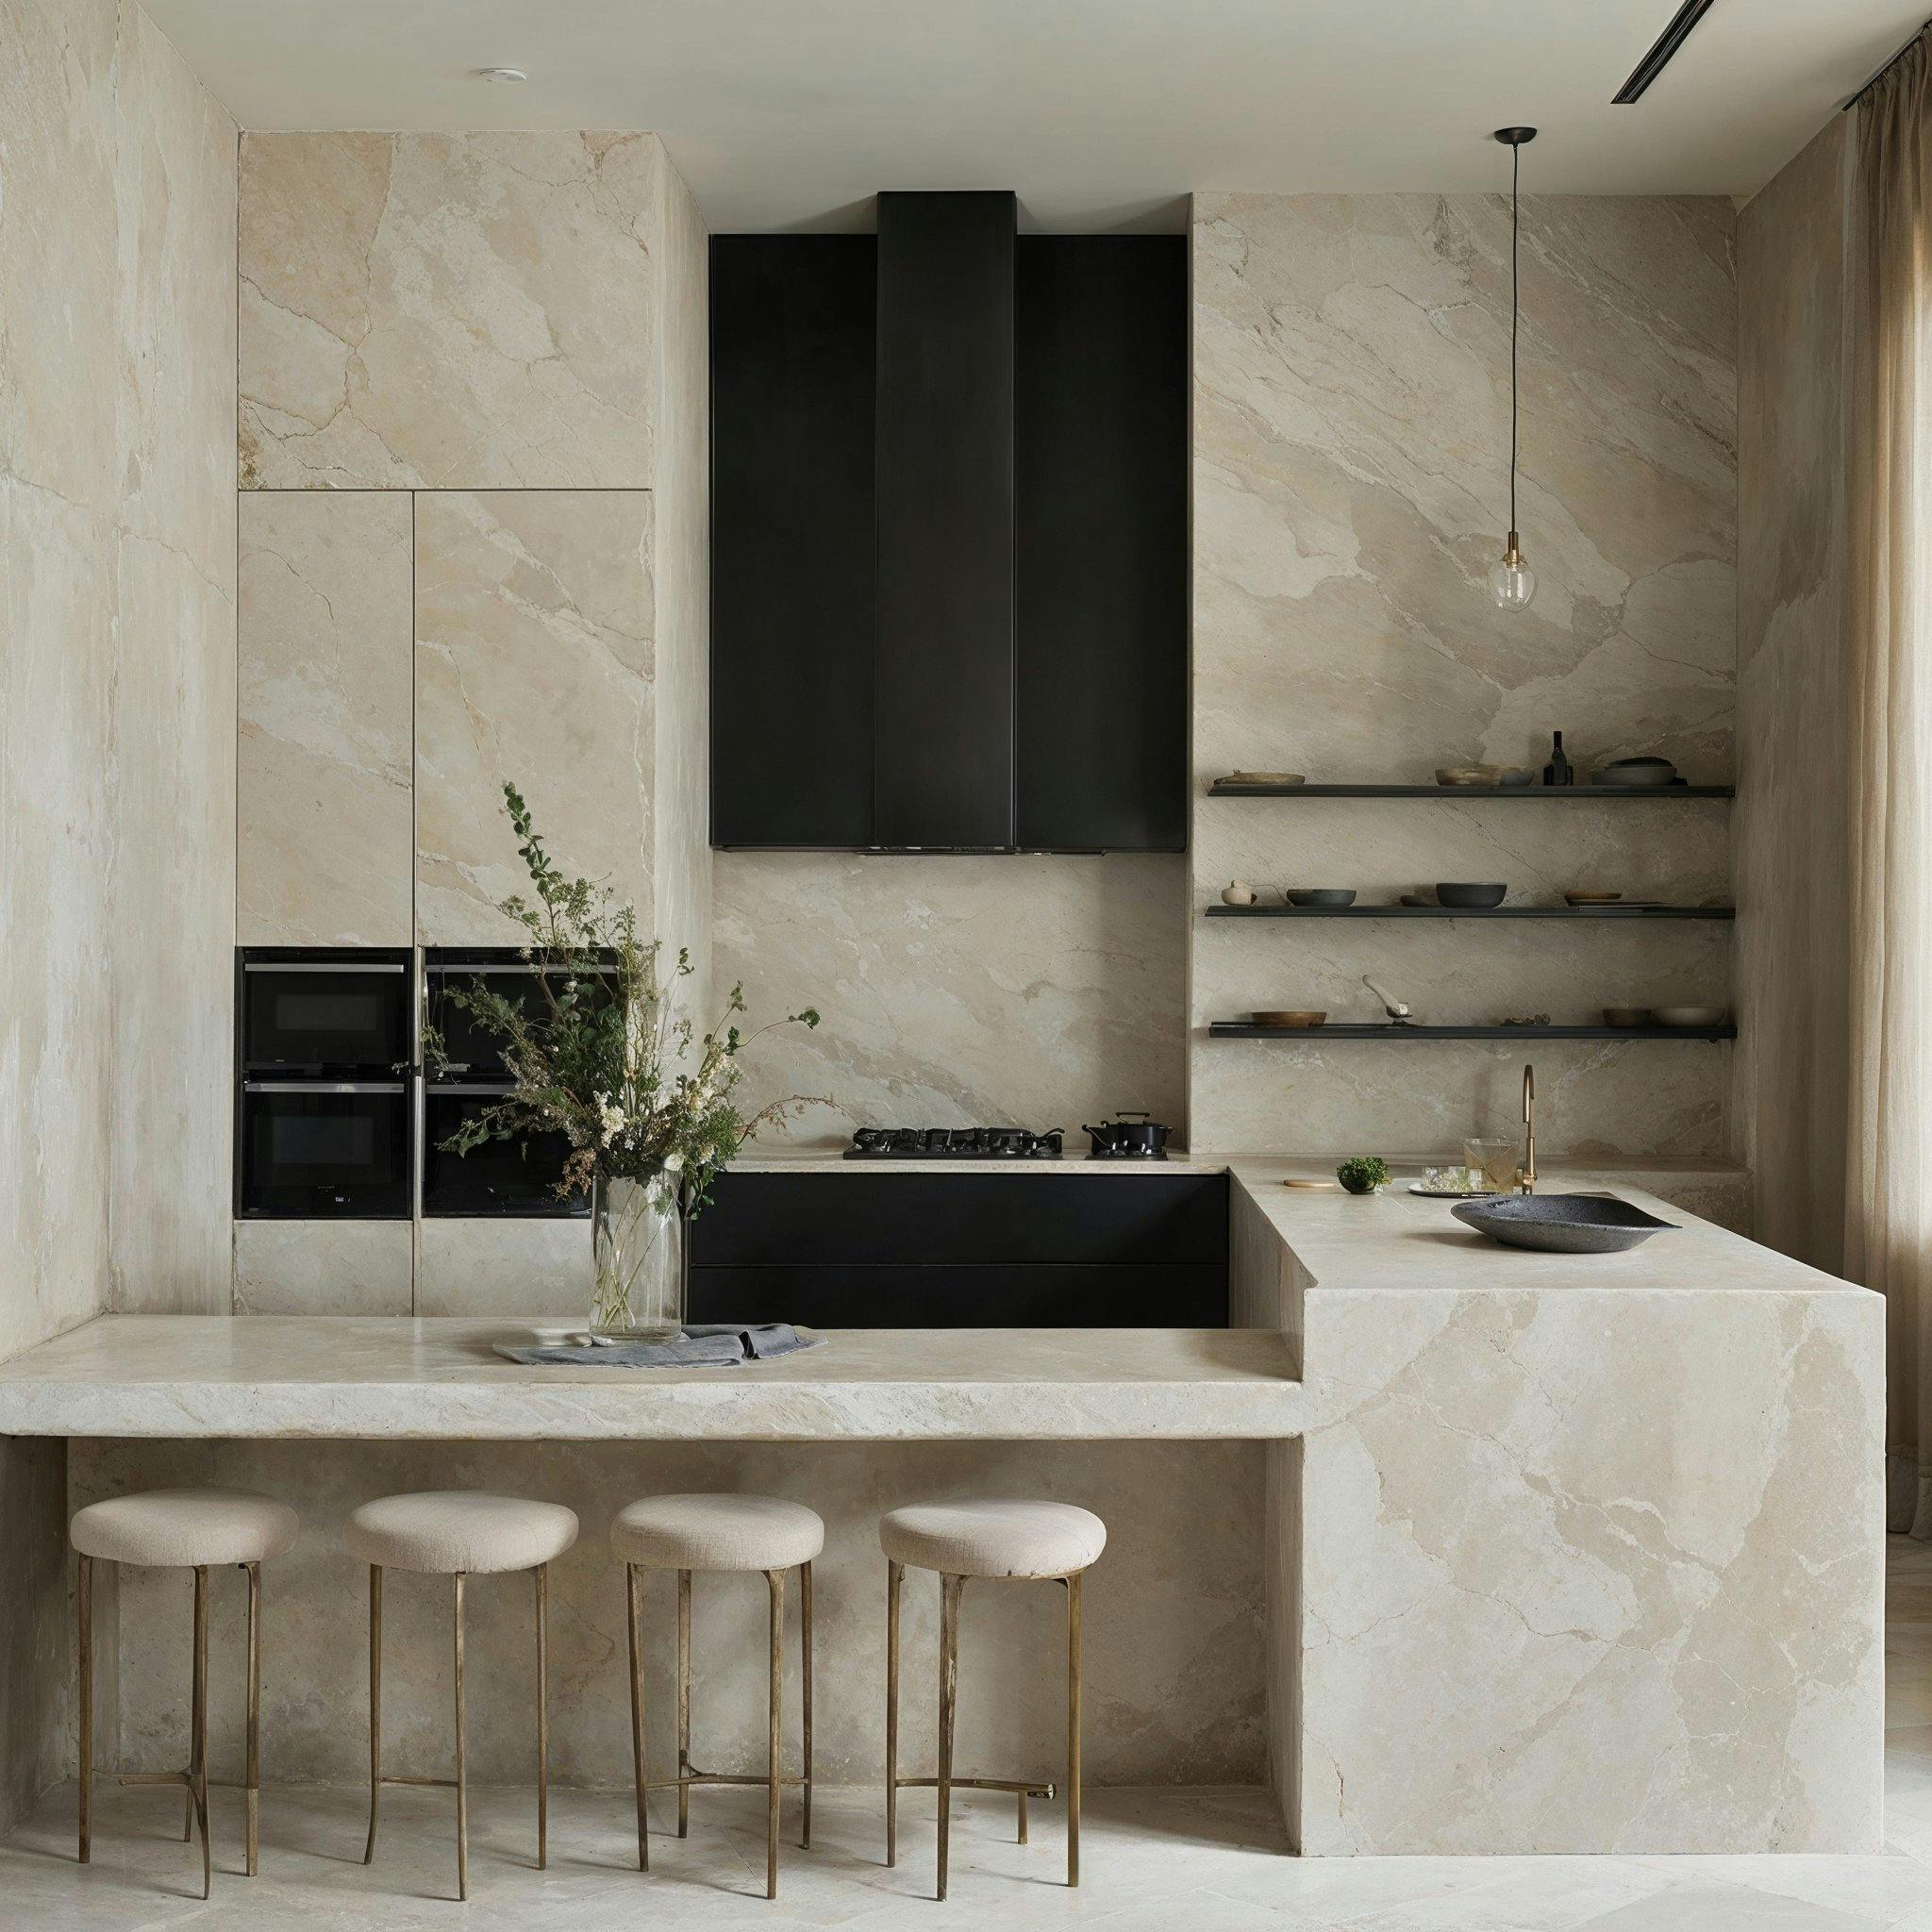 What if we imagine a Scene with a monolithic travertine Kitchen where the use of natural stone is a structural feature?